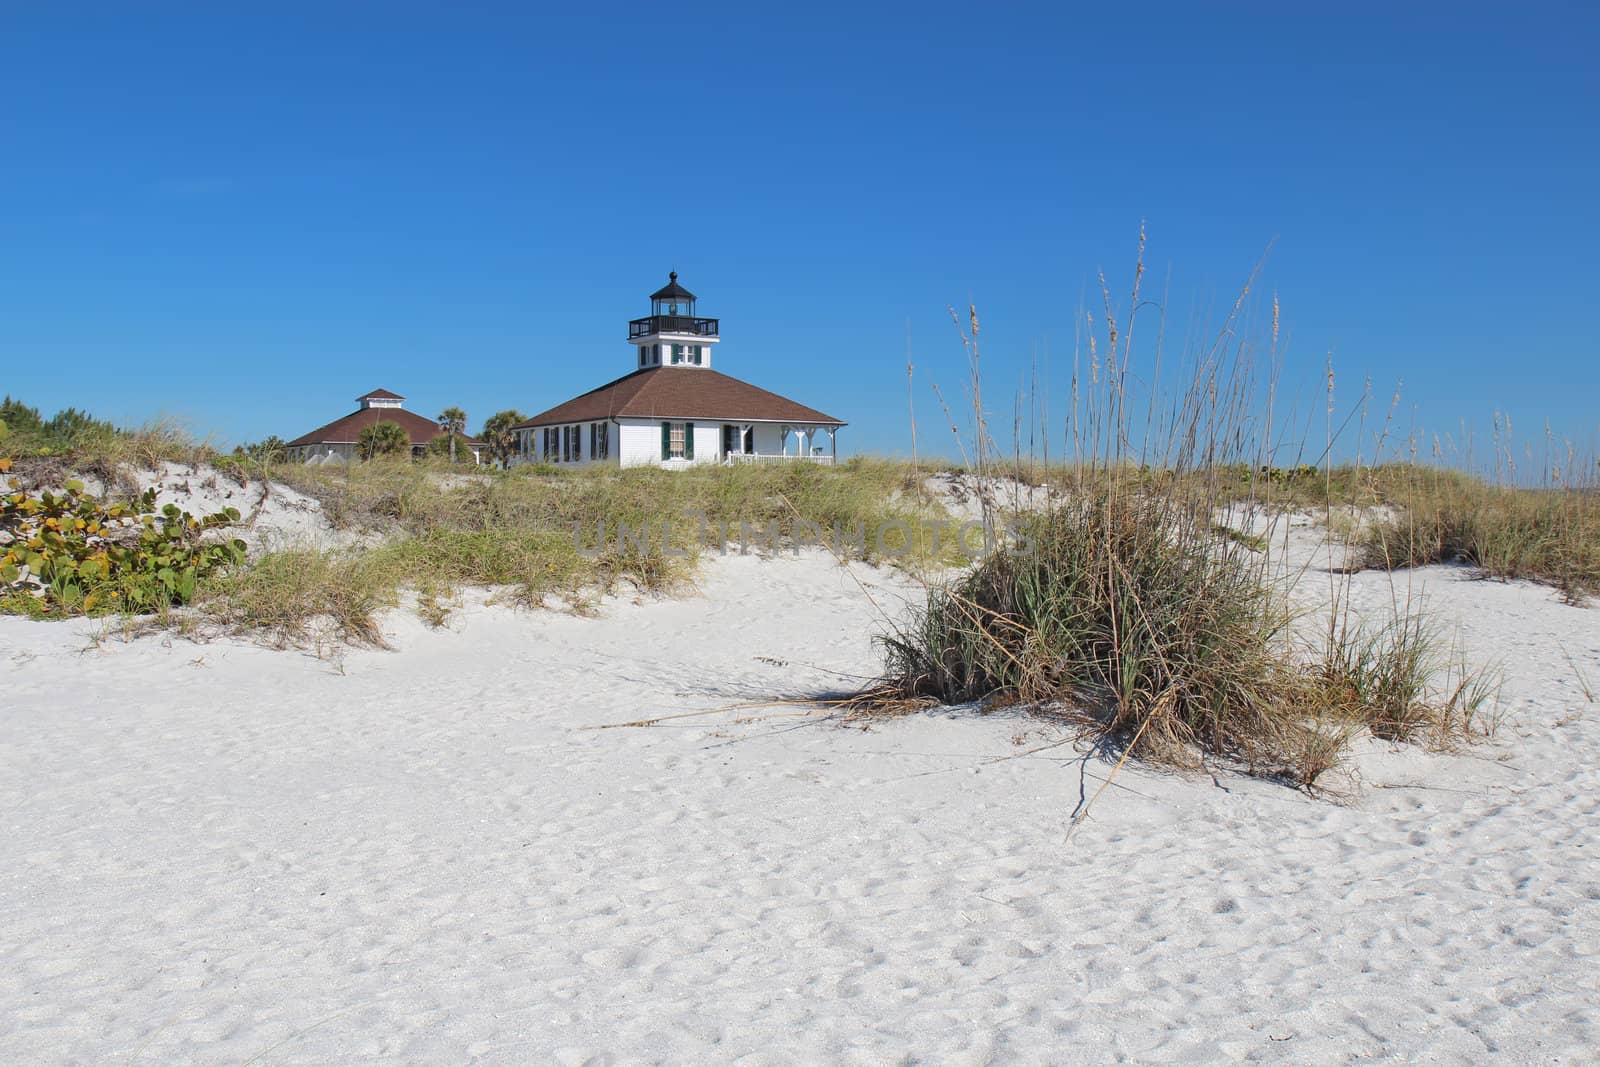 The Port Boca Grande Lighthouse and assistant keeper's dwelling on Gasparilla Island, Florida viewed from the beach with sea oats (Uniola paniculata), sea grape (Coccoloba uvifera) and cabbage palmettos (Sabal palmetto)